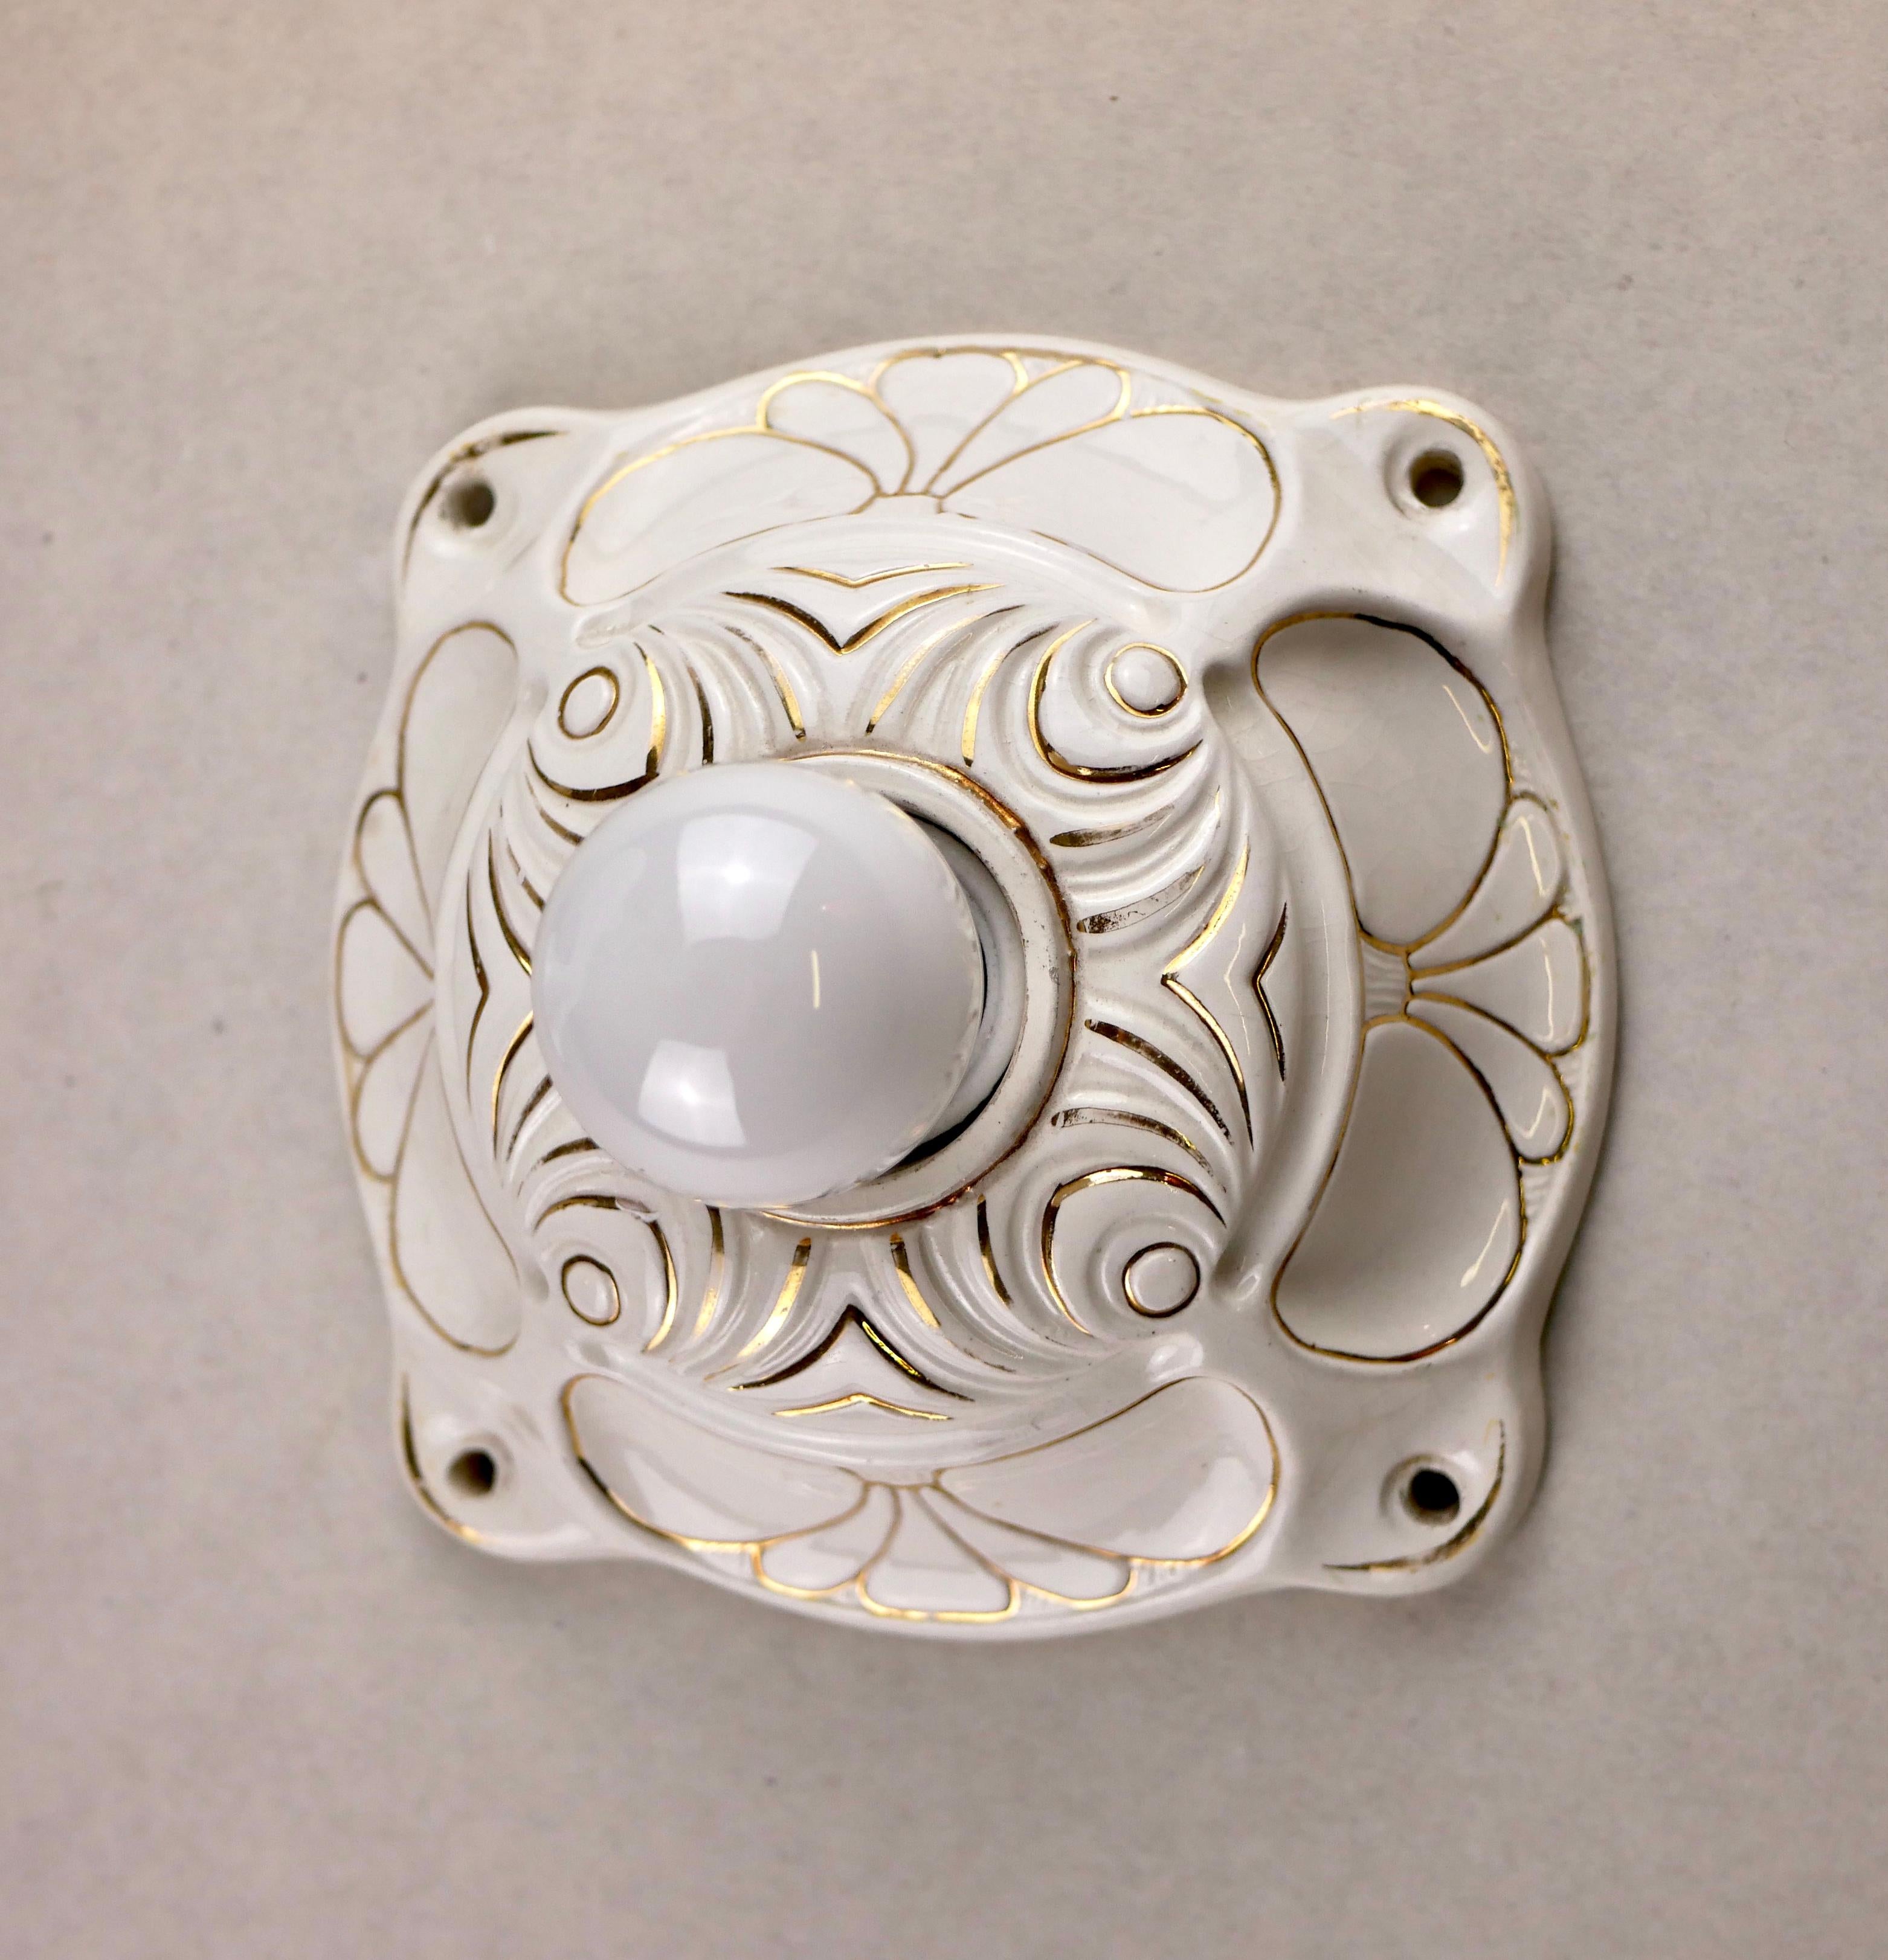 Dutch Porcelain Art Deco Style Wall Light from the Netherlands, 1940s